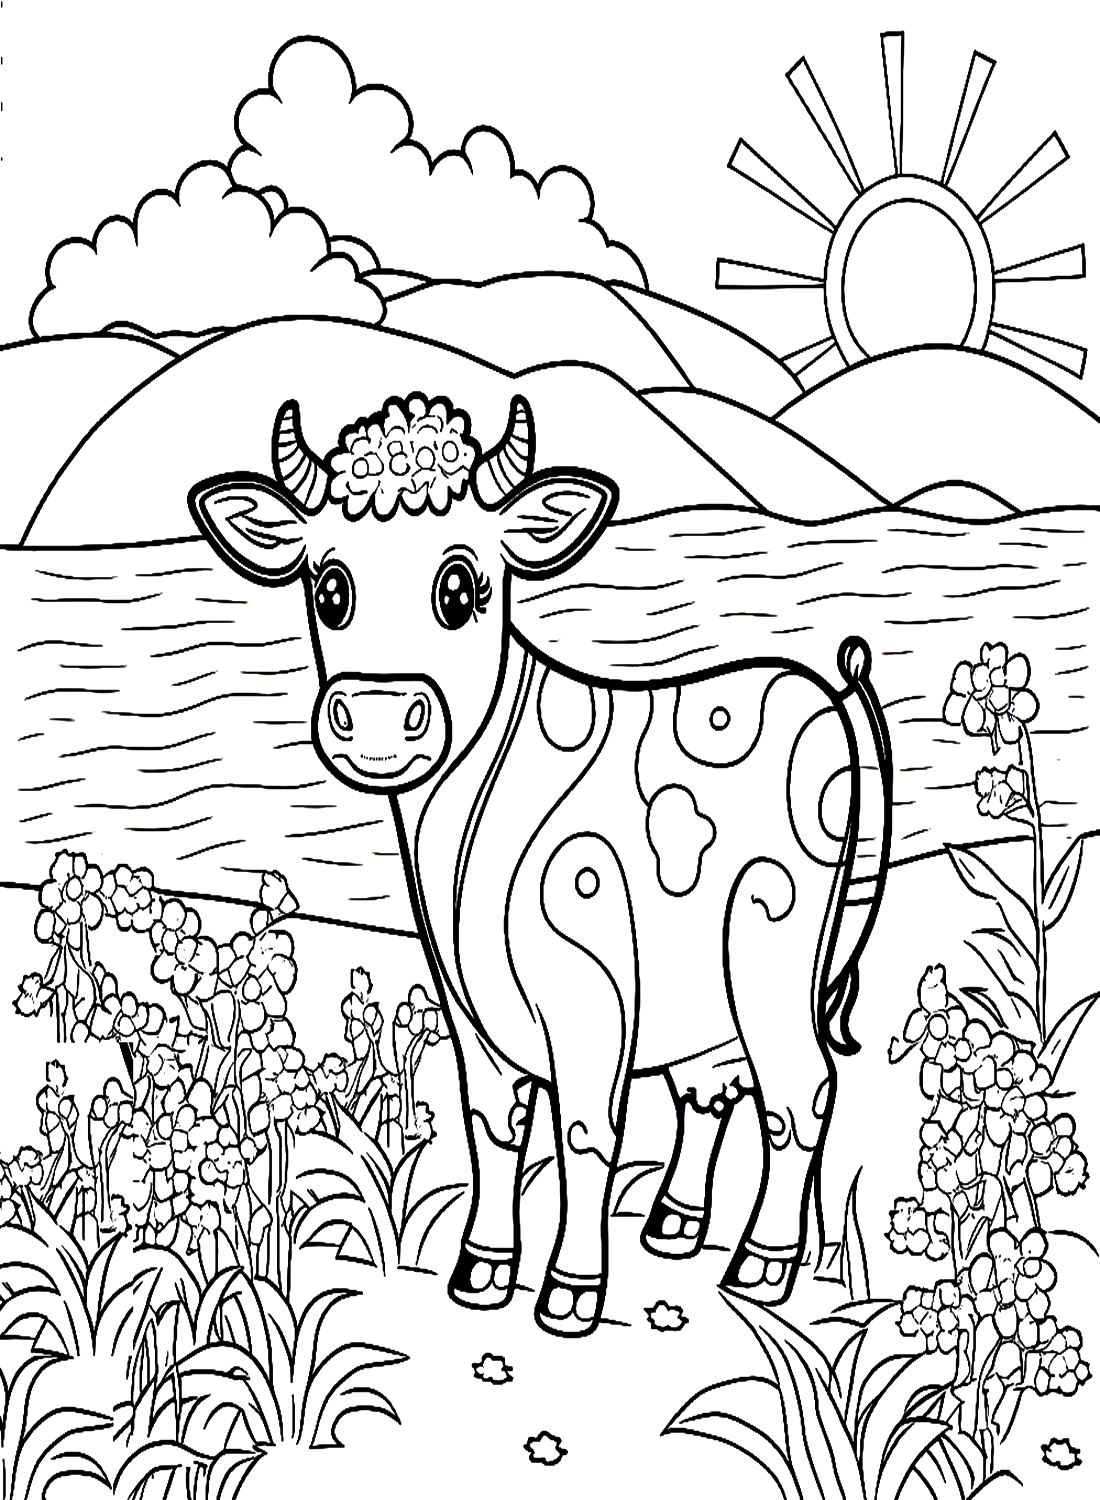 Calf Coloring Pages - Free Printable Coloring Pages